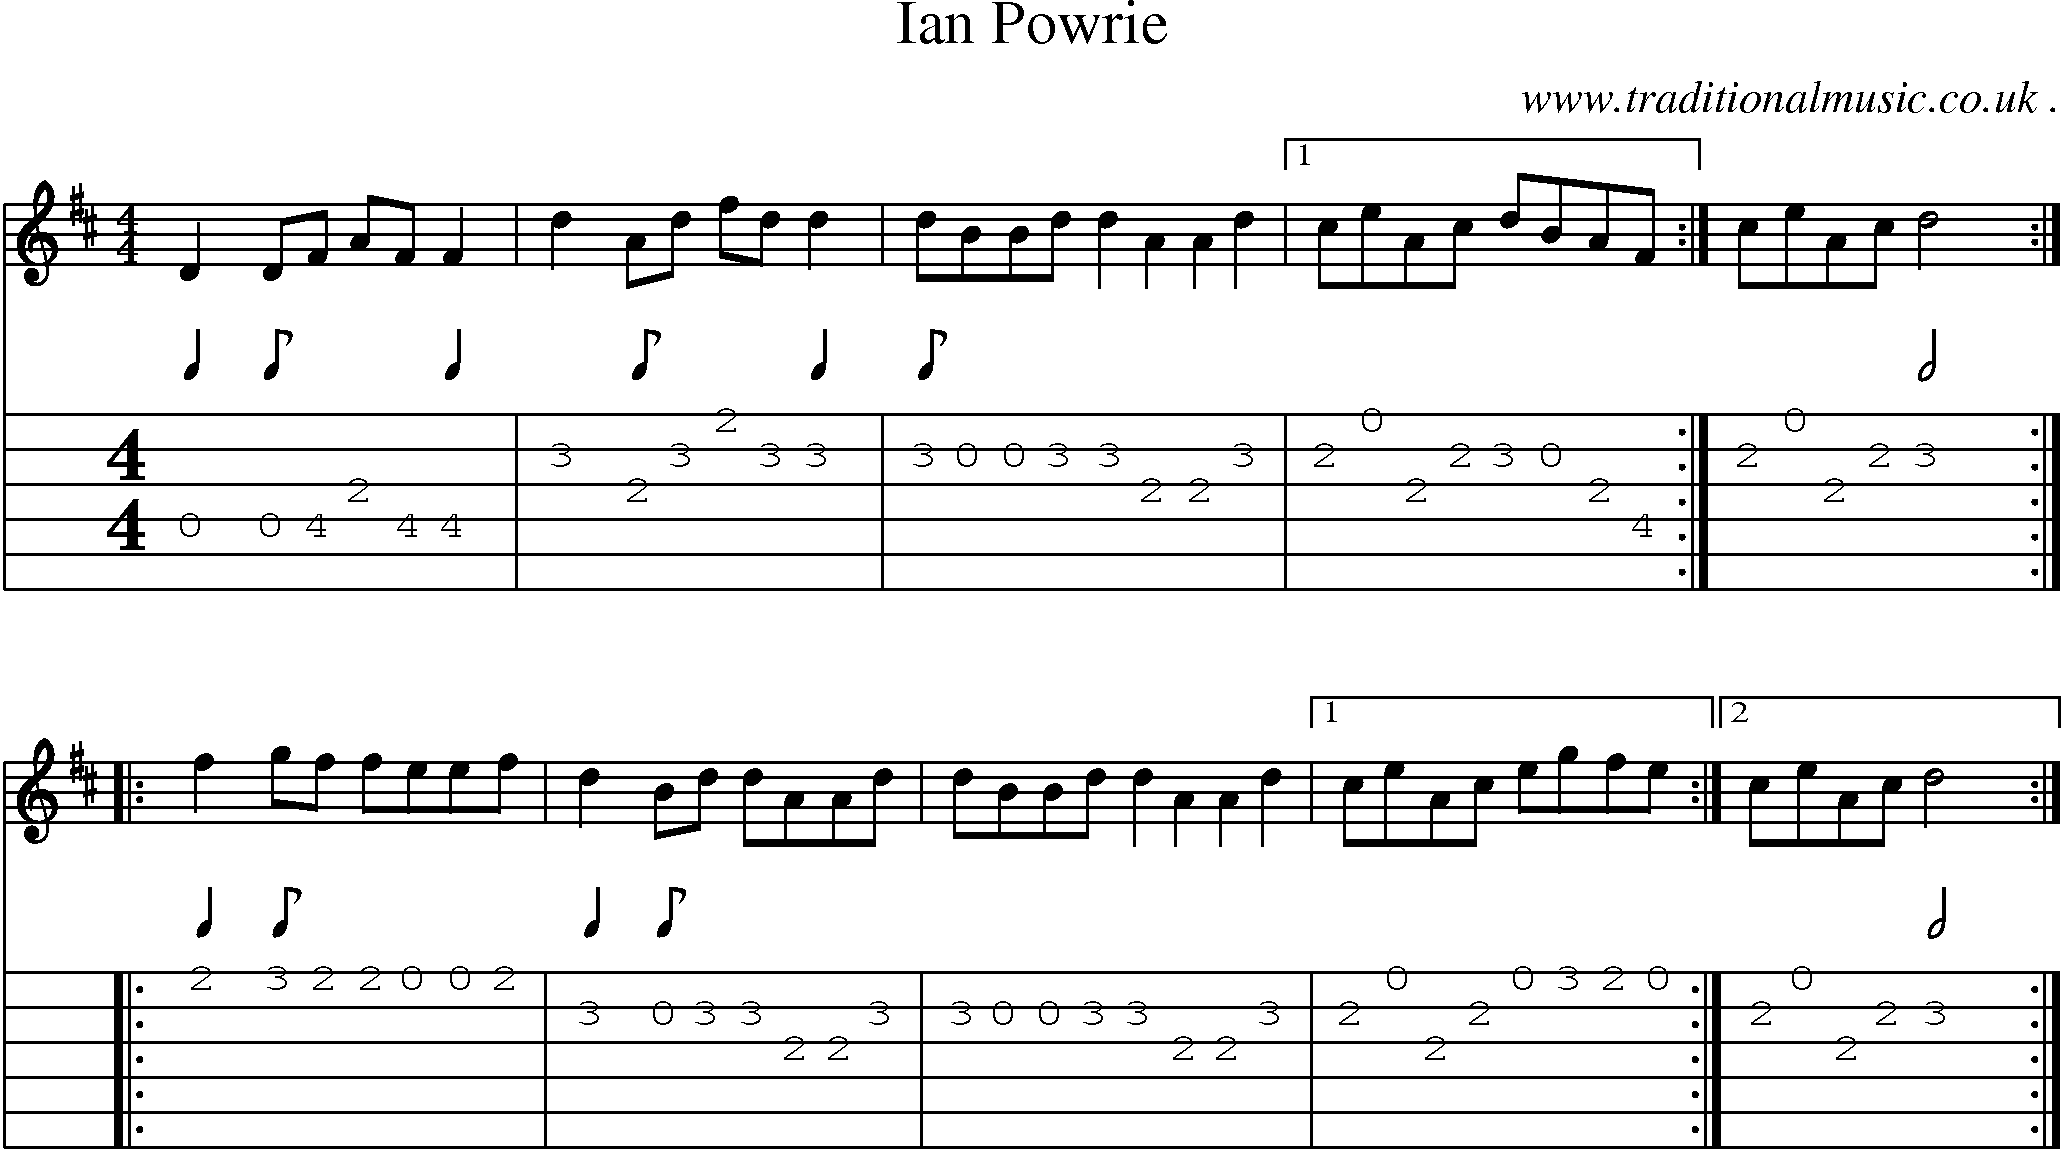 Sheet-music  score, Chords and Guitar Tabs for Ian Powrie